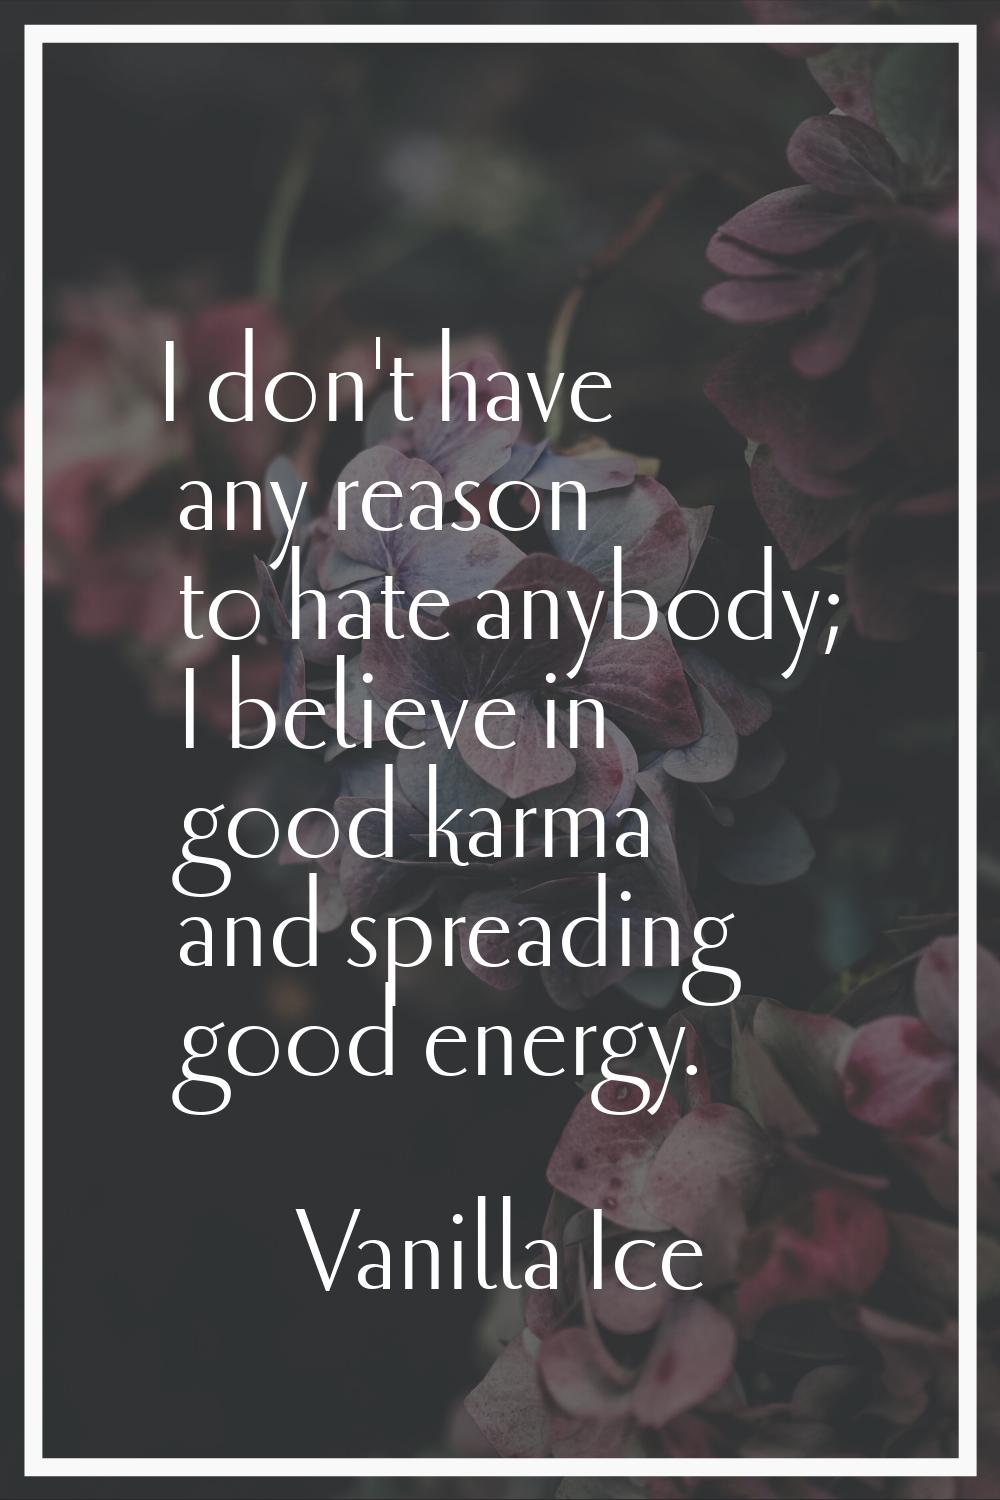 I don't have any reason to hate anybody; I believe in good karma and spreading good energy.